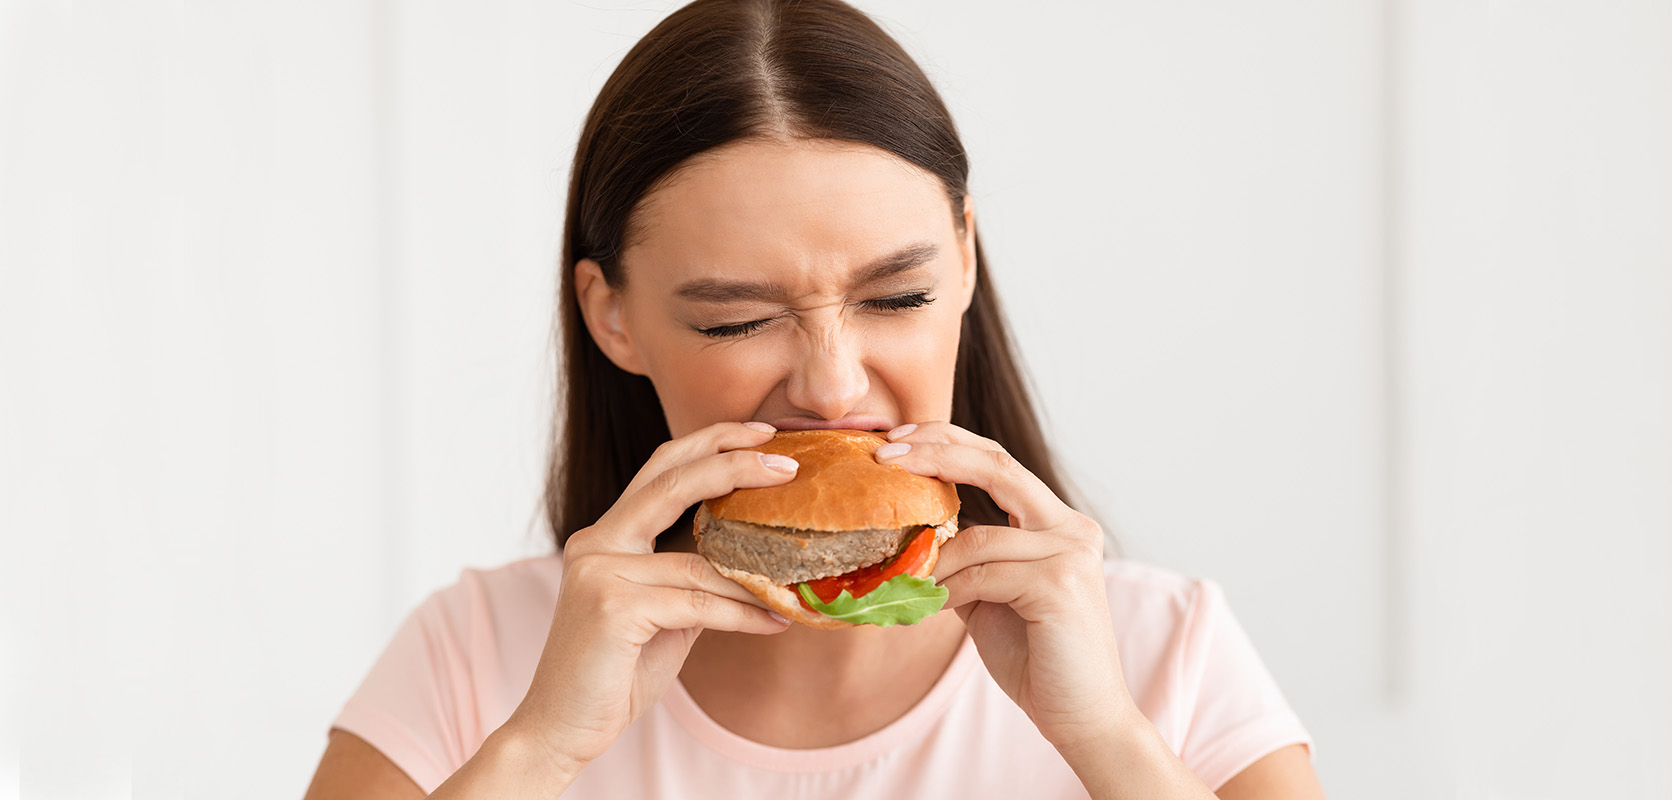 Woman enjoying a burger after buying hash online from west coast cannabis dispensary and mail order weed online Canada. BC cannabis. budgetbuds.